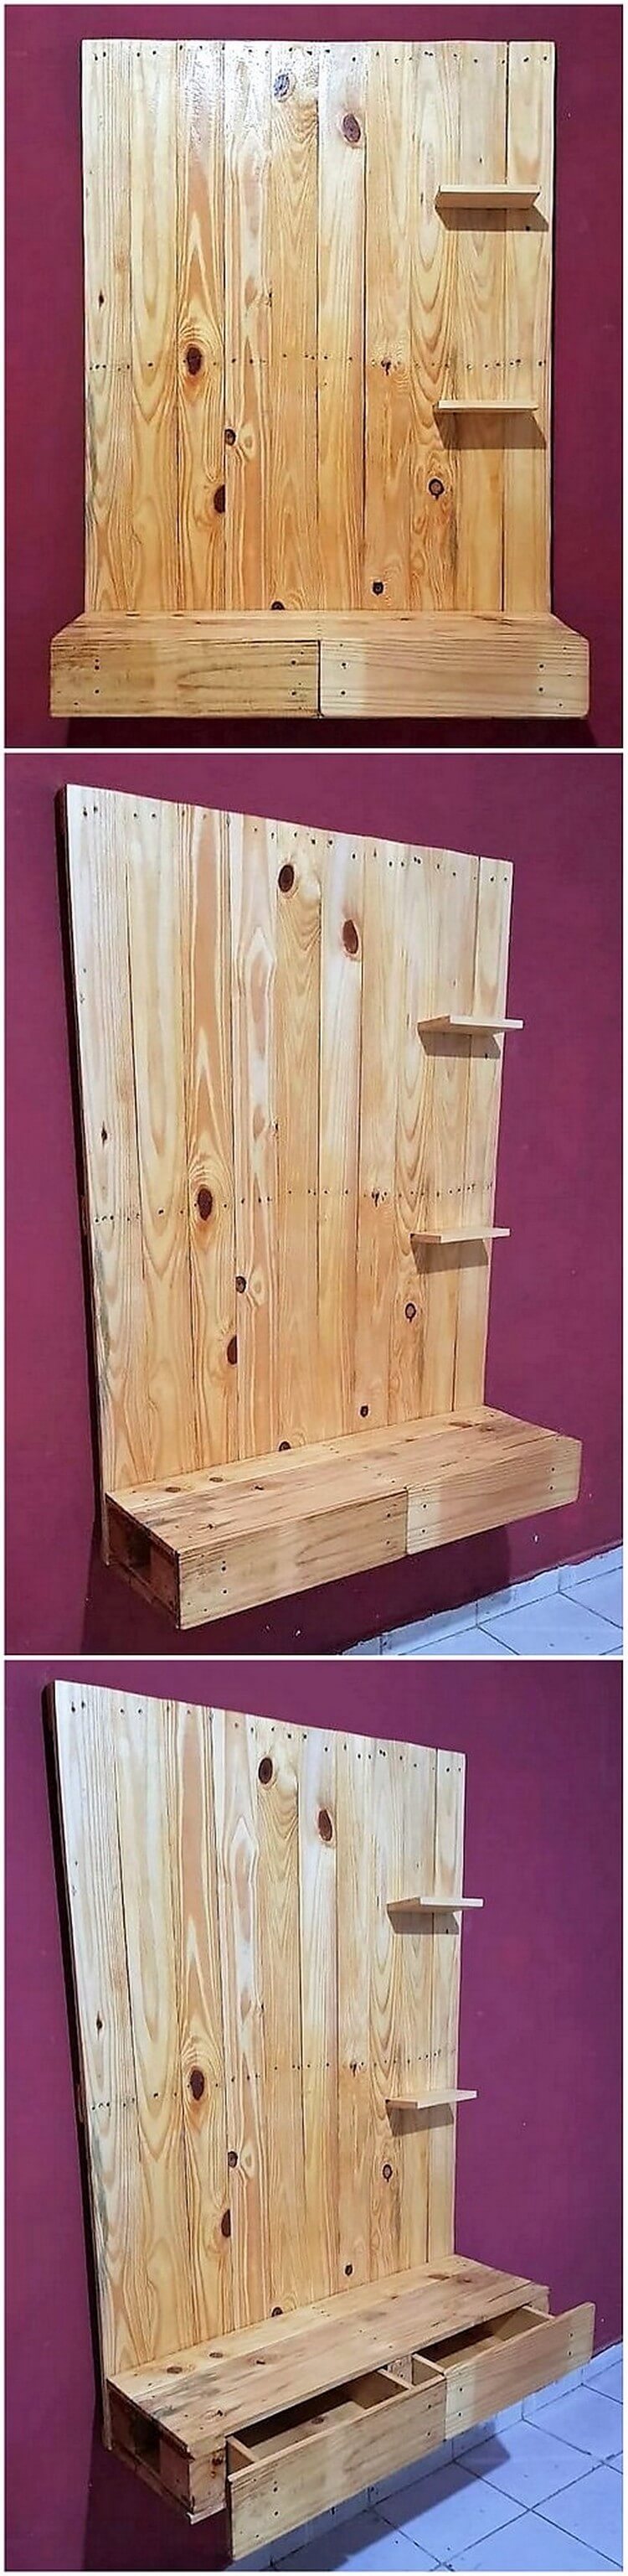 Pallet Wall LED Holder with Drawers